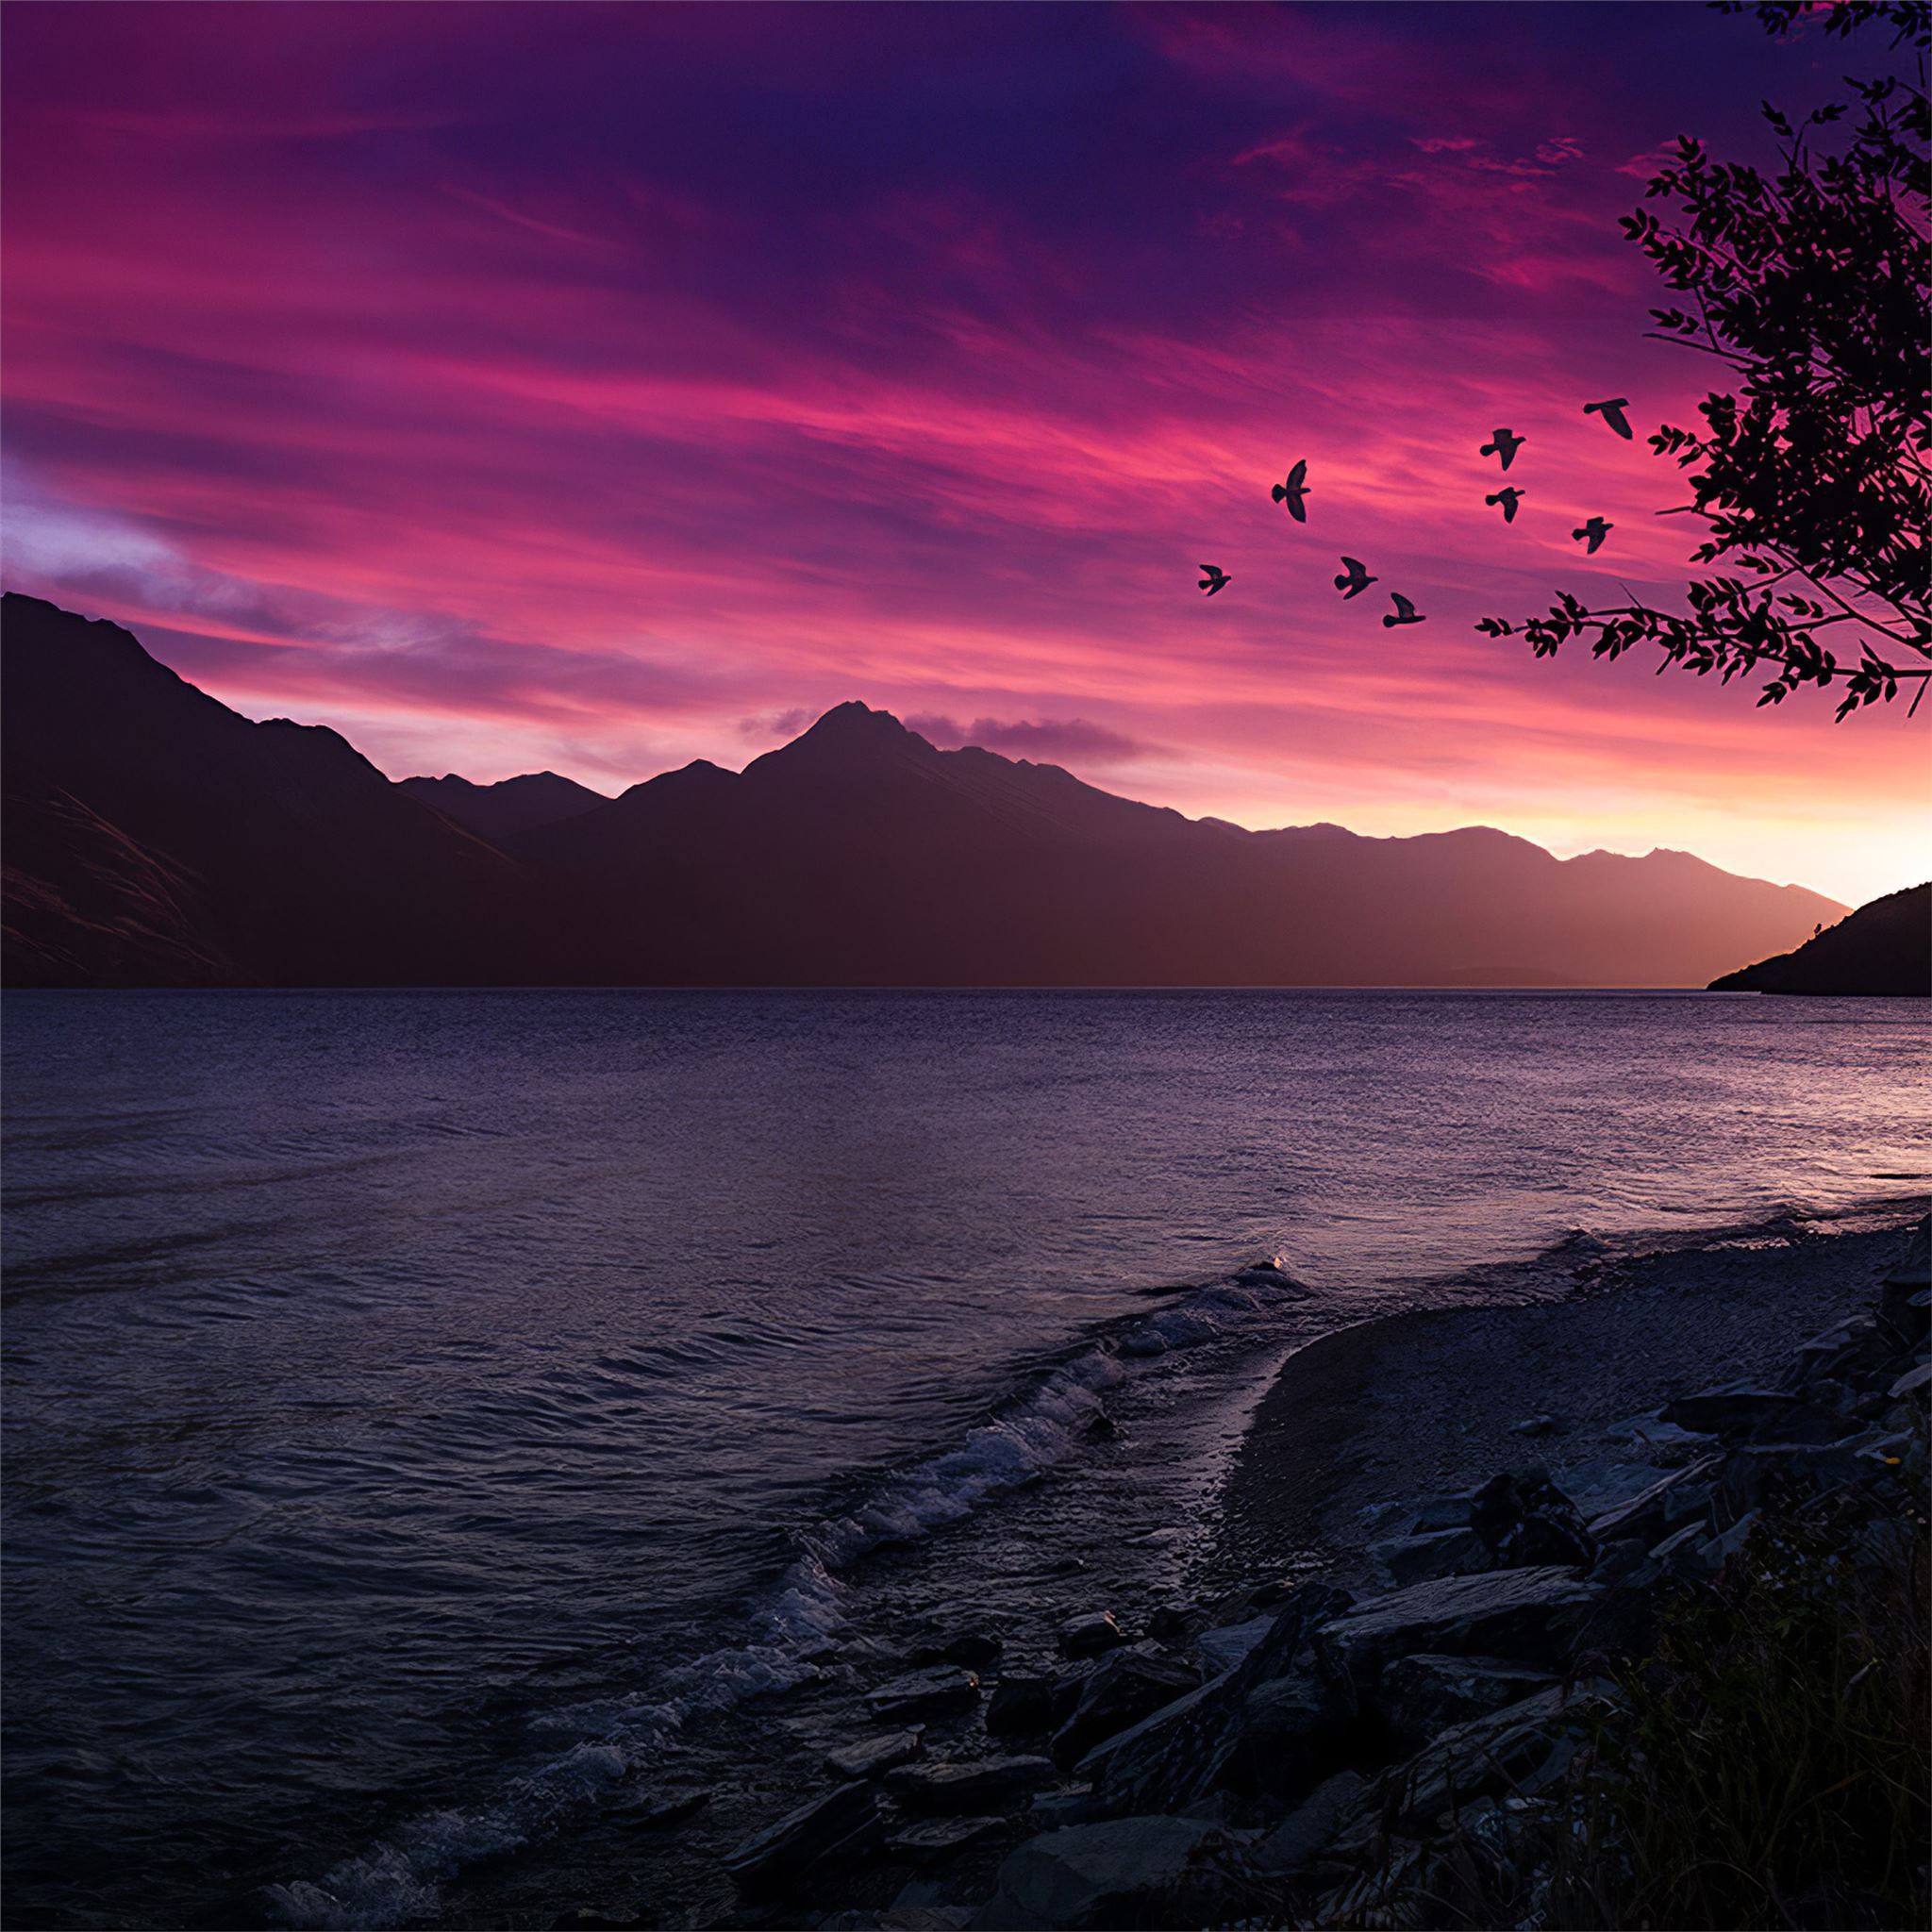 Birds flying over a lake during a purple sunset - Twilight